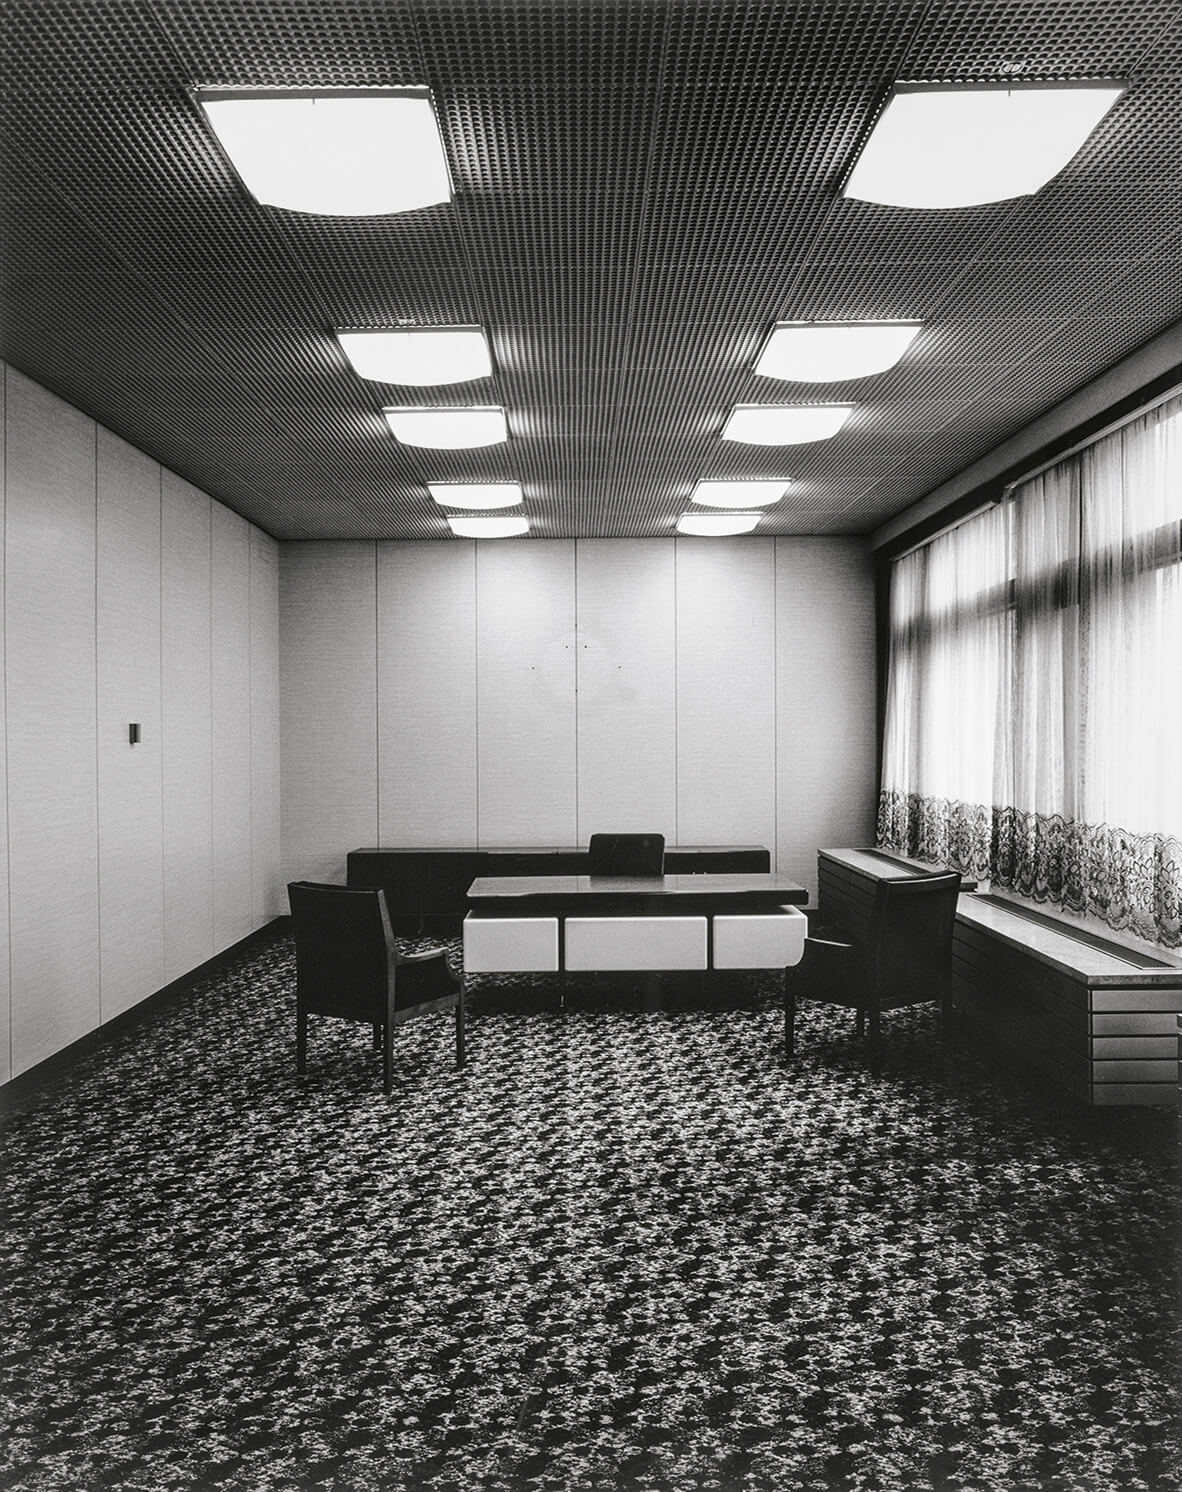 Doug Hall, Palast der Republik, Office of the President of the Peoples' Parliament, 1992, gelatin silver print, 2/5, 156 x 123 cm, framed